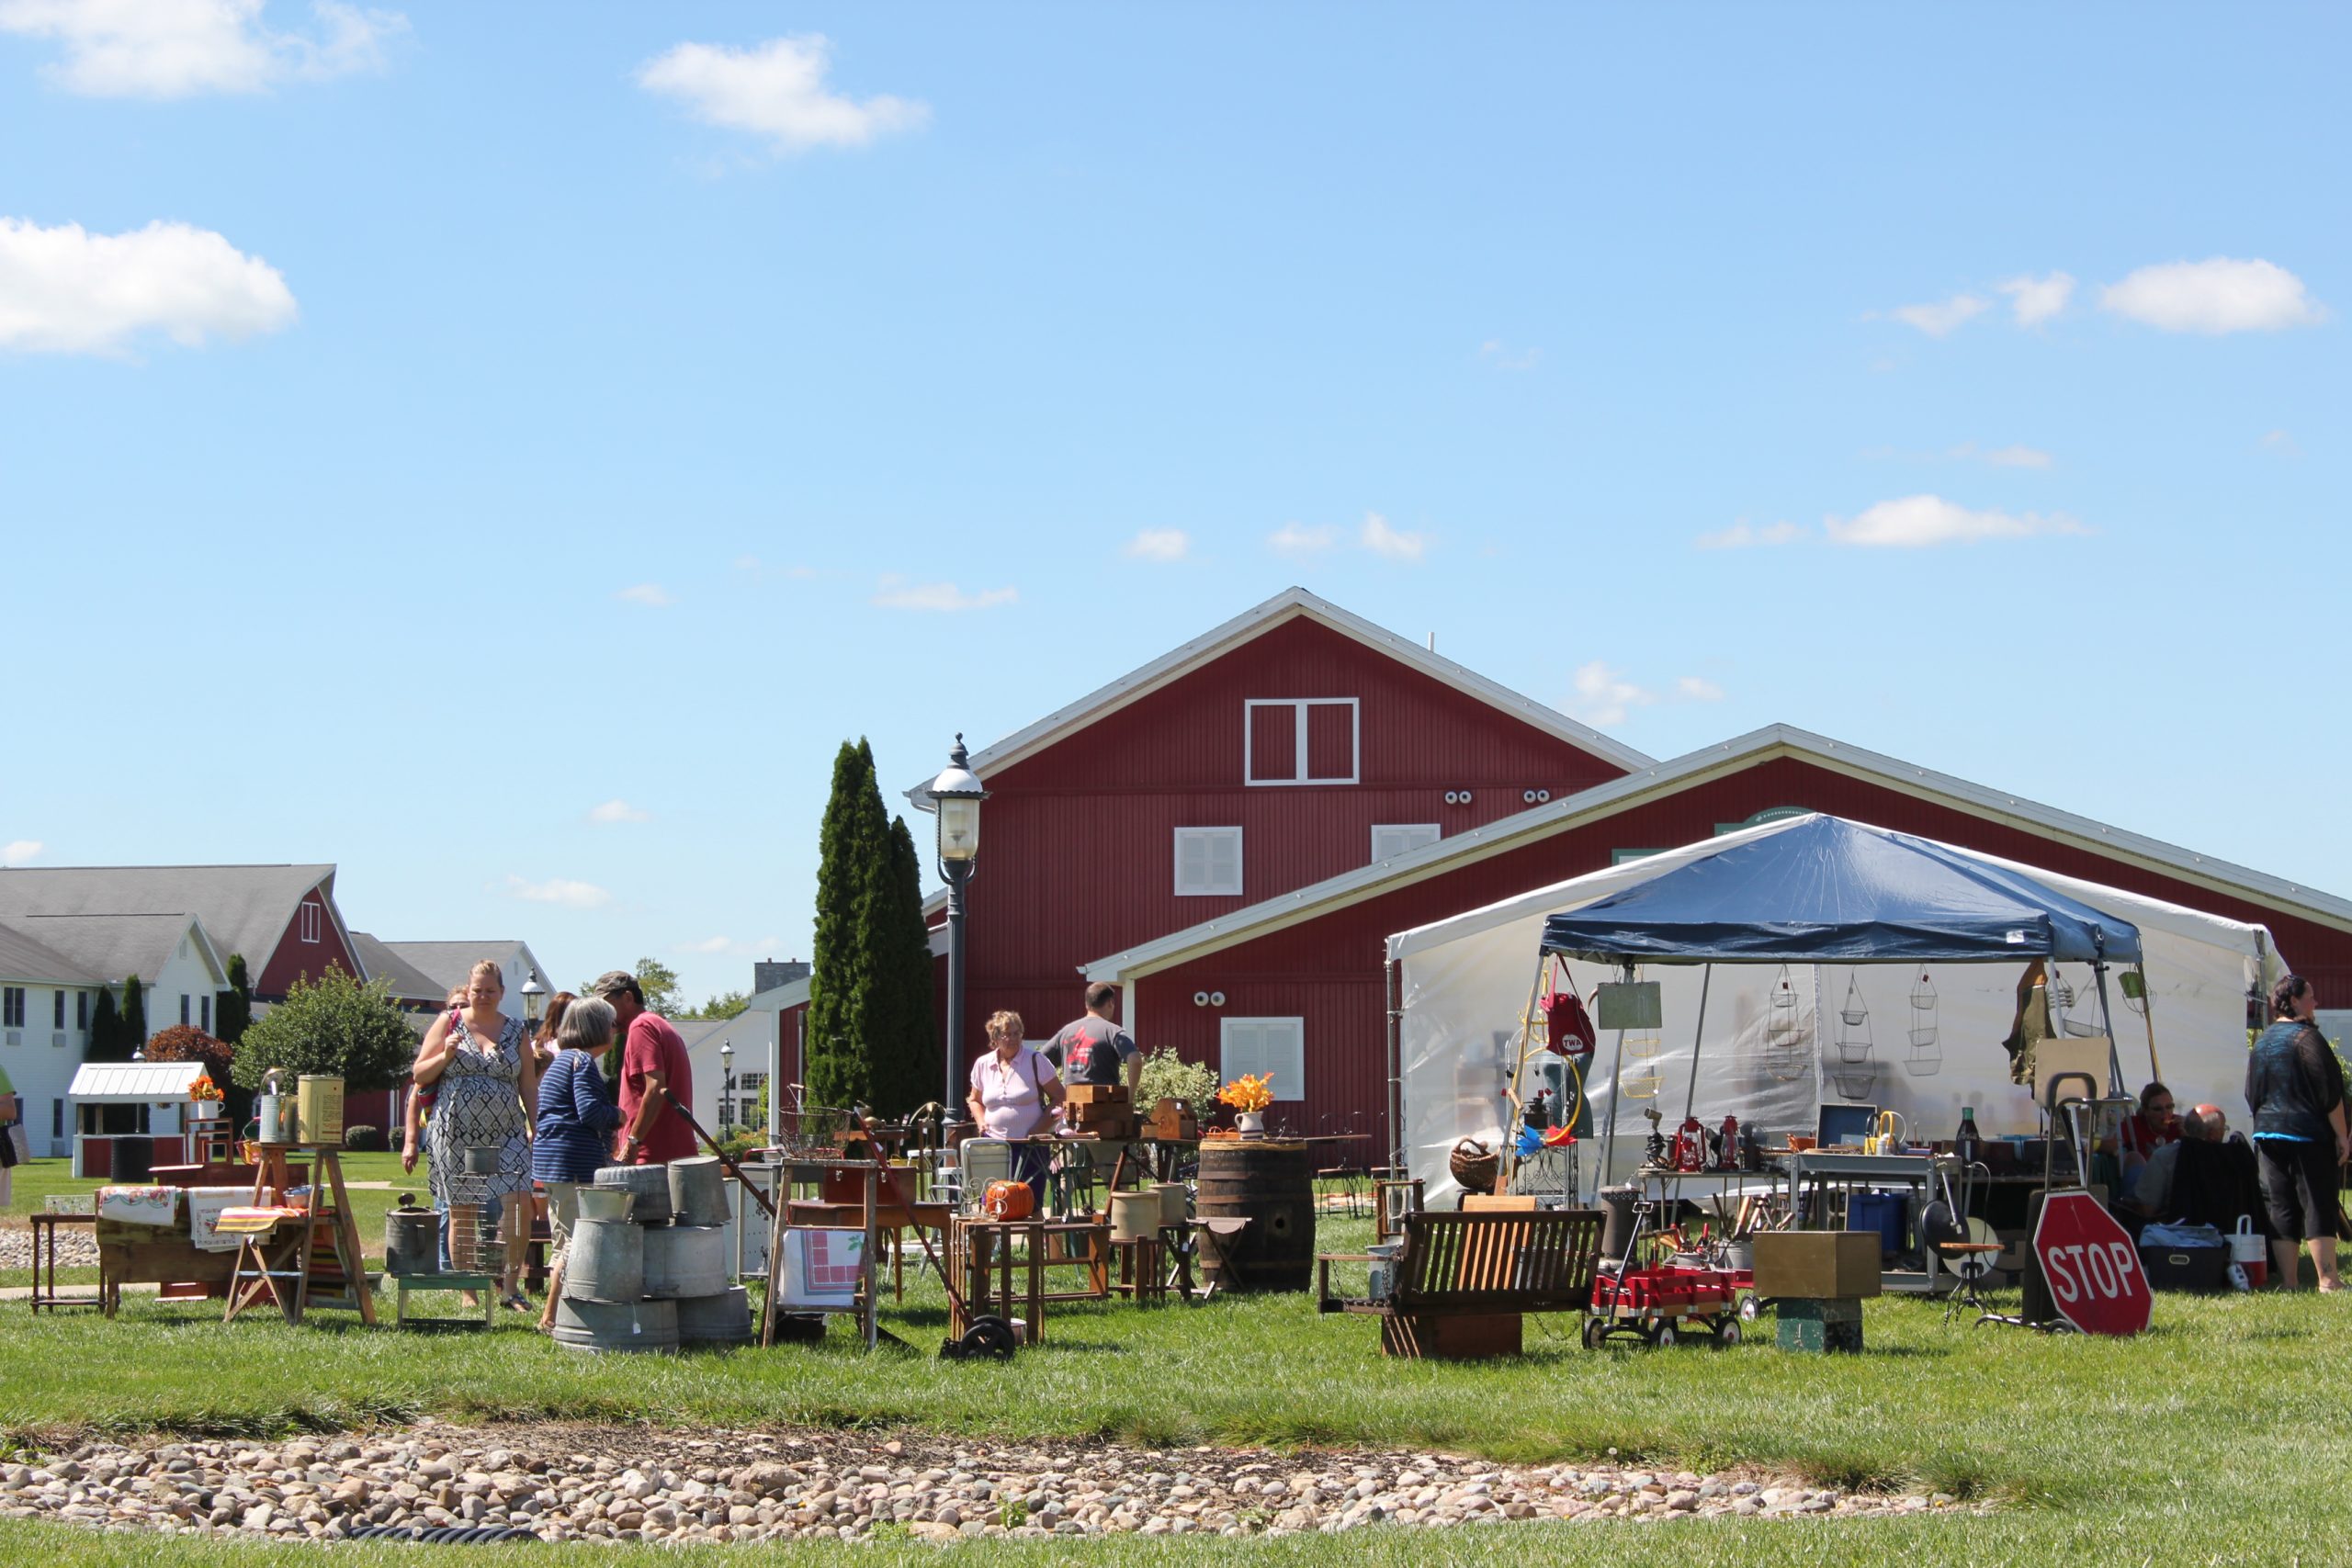 Antique and vintage market tents, barn, and sale items.